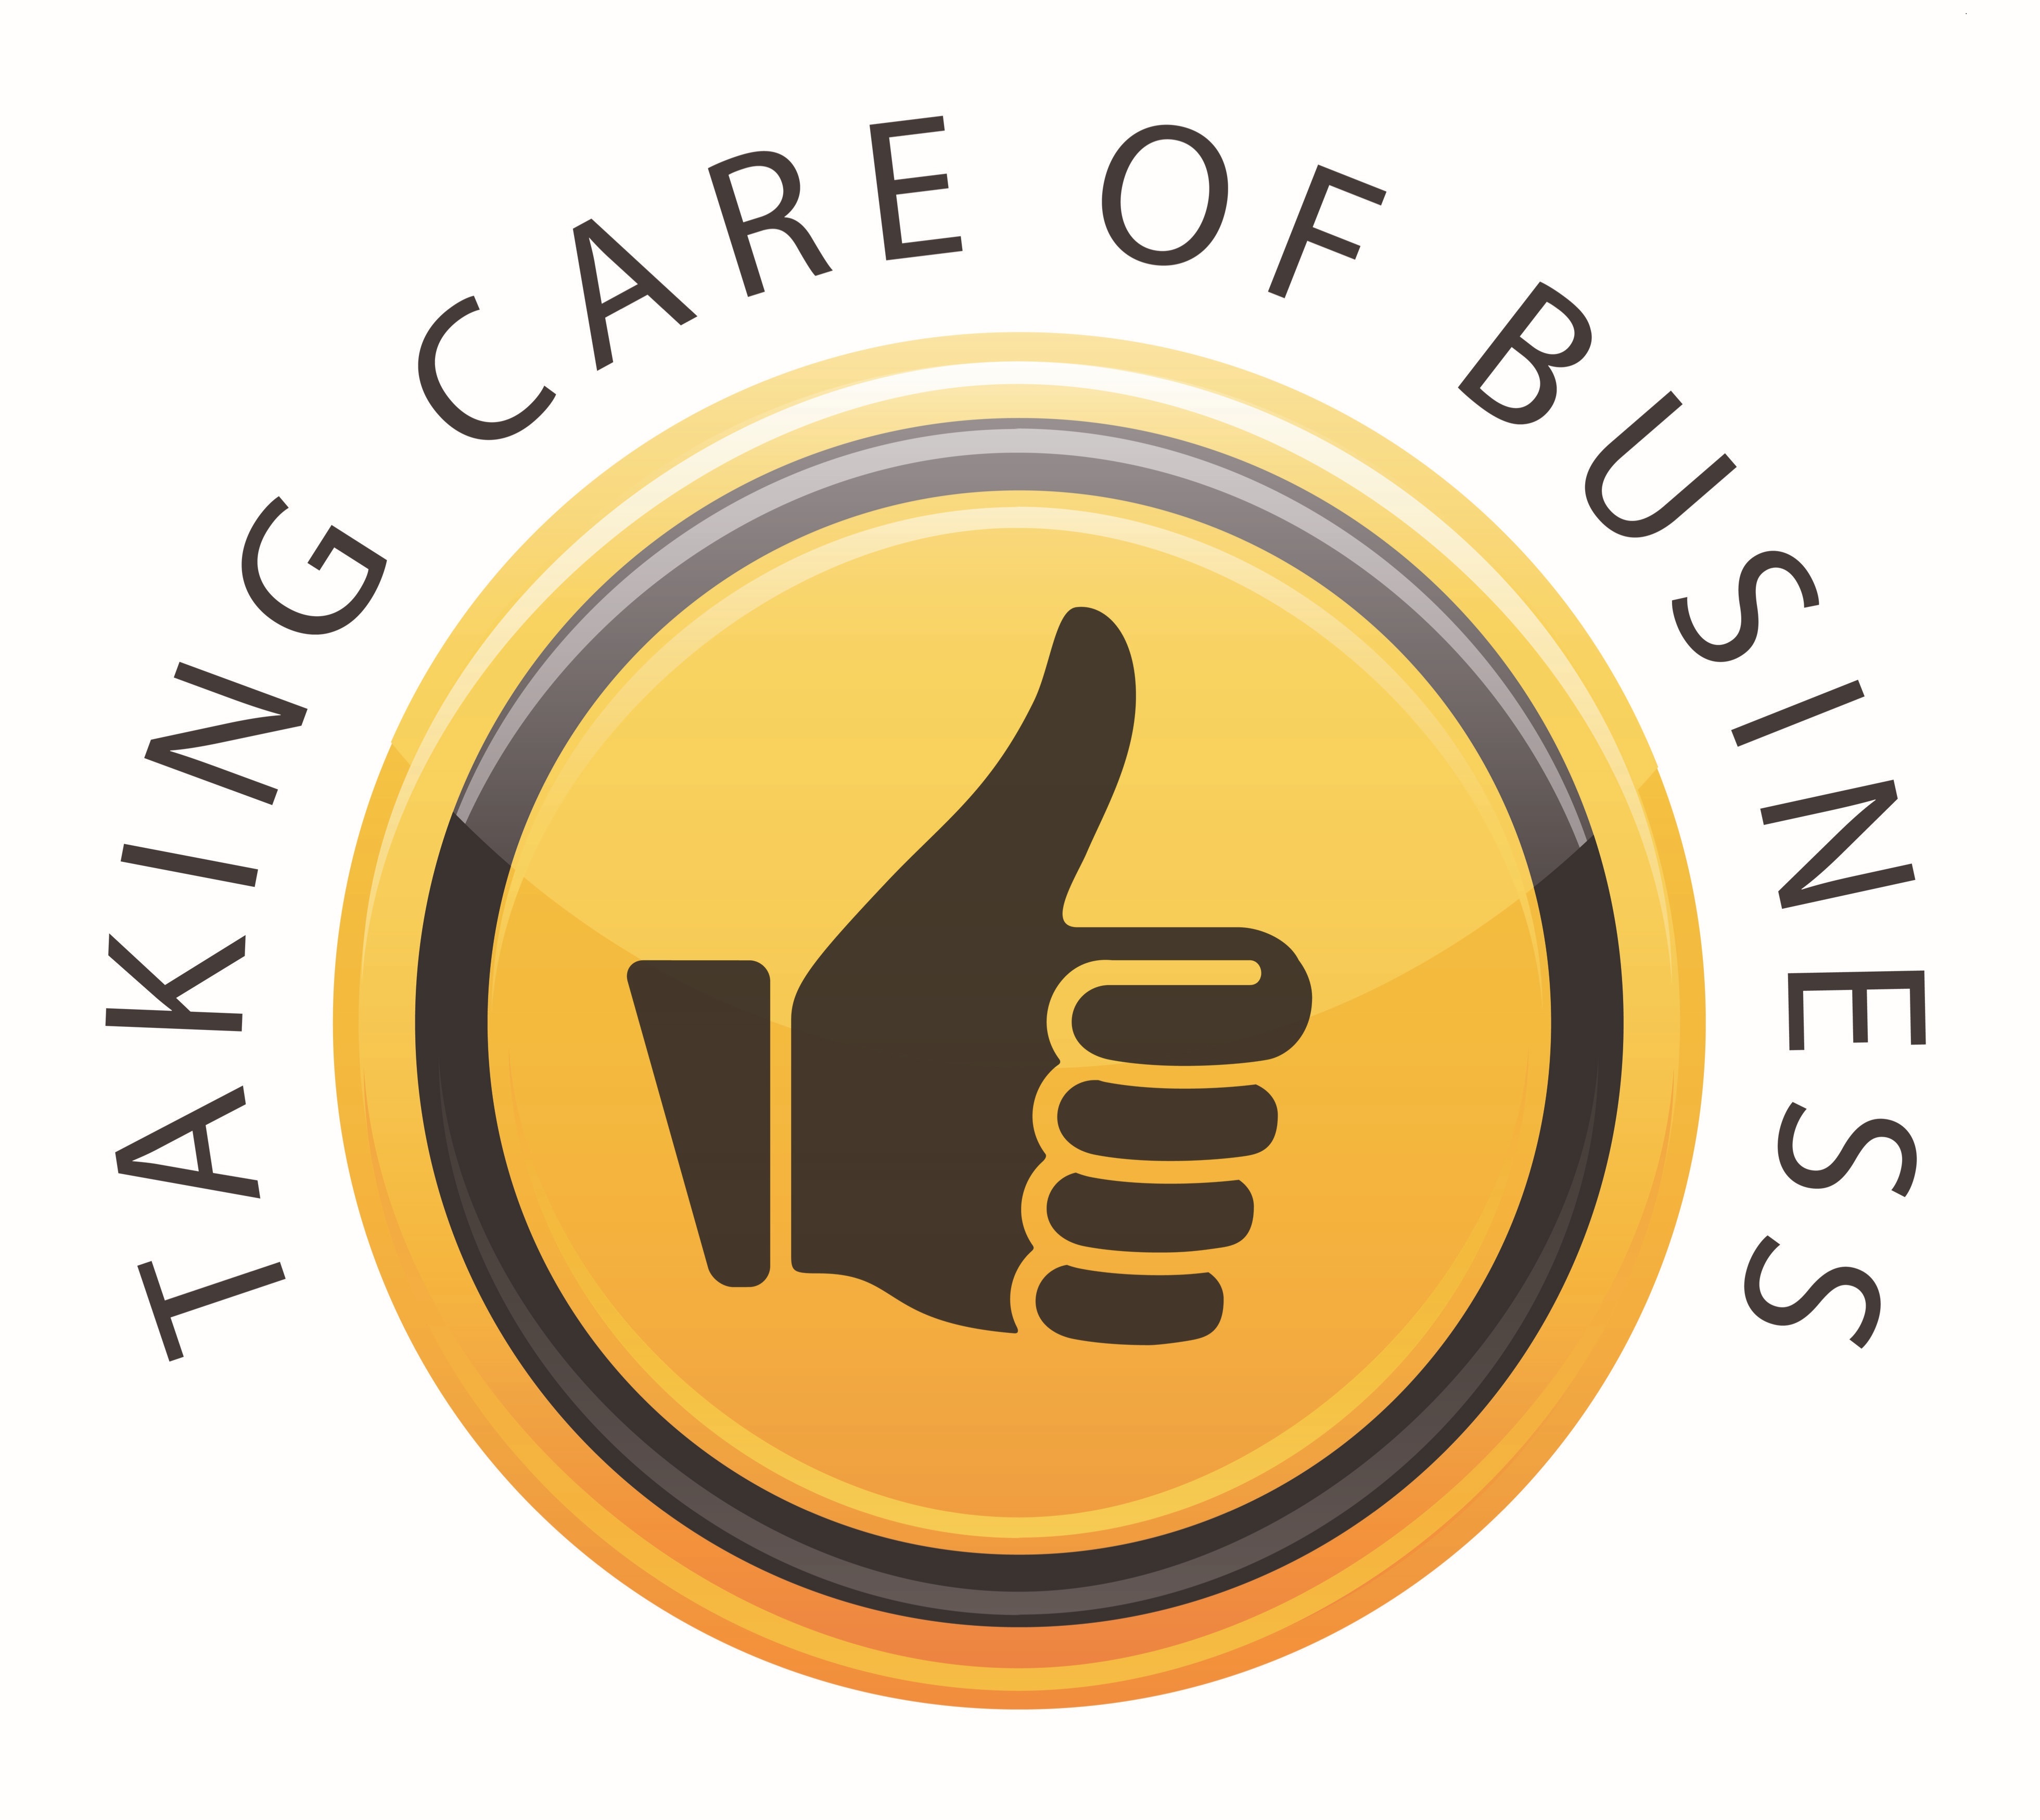 taking care of business logo